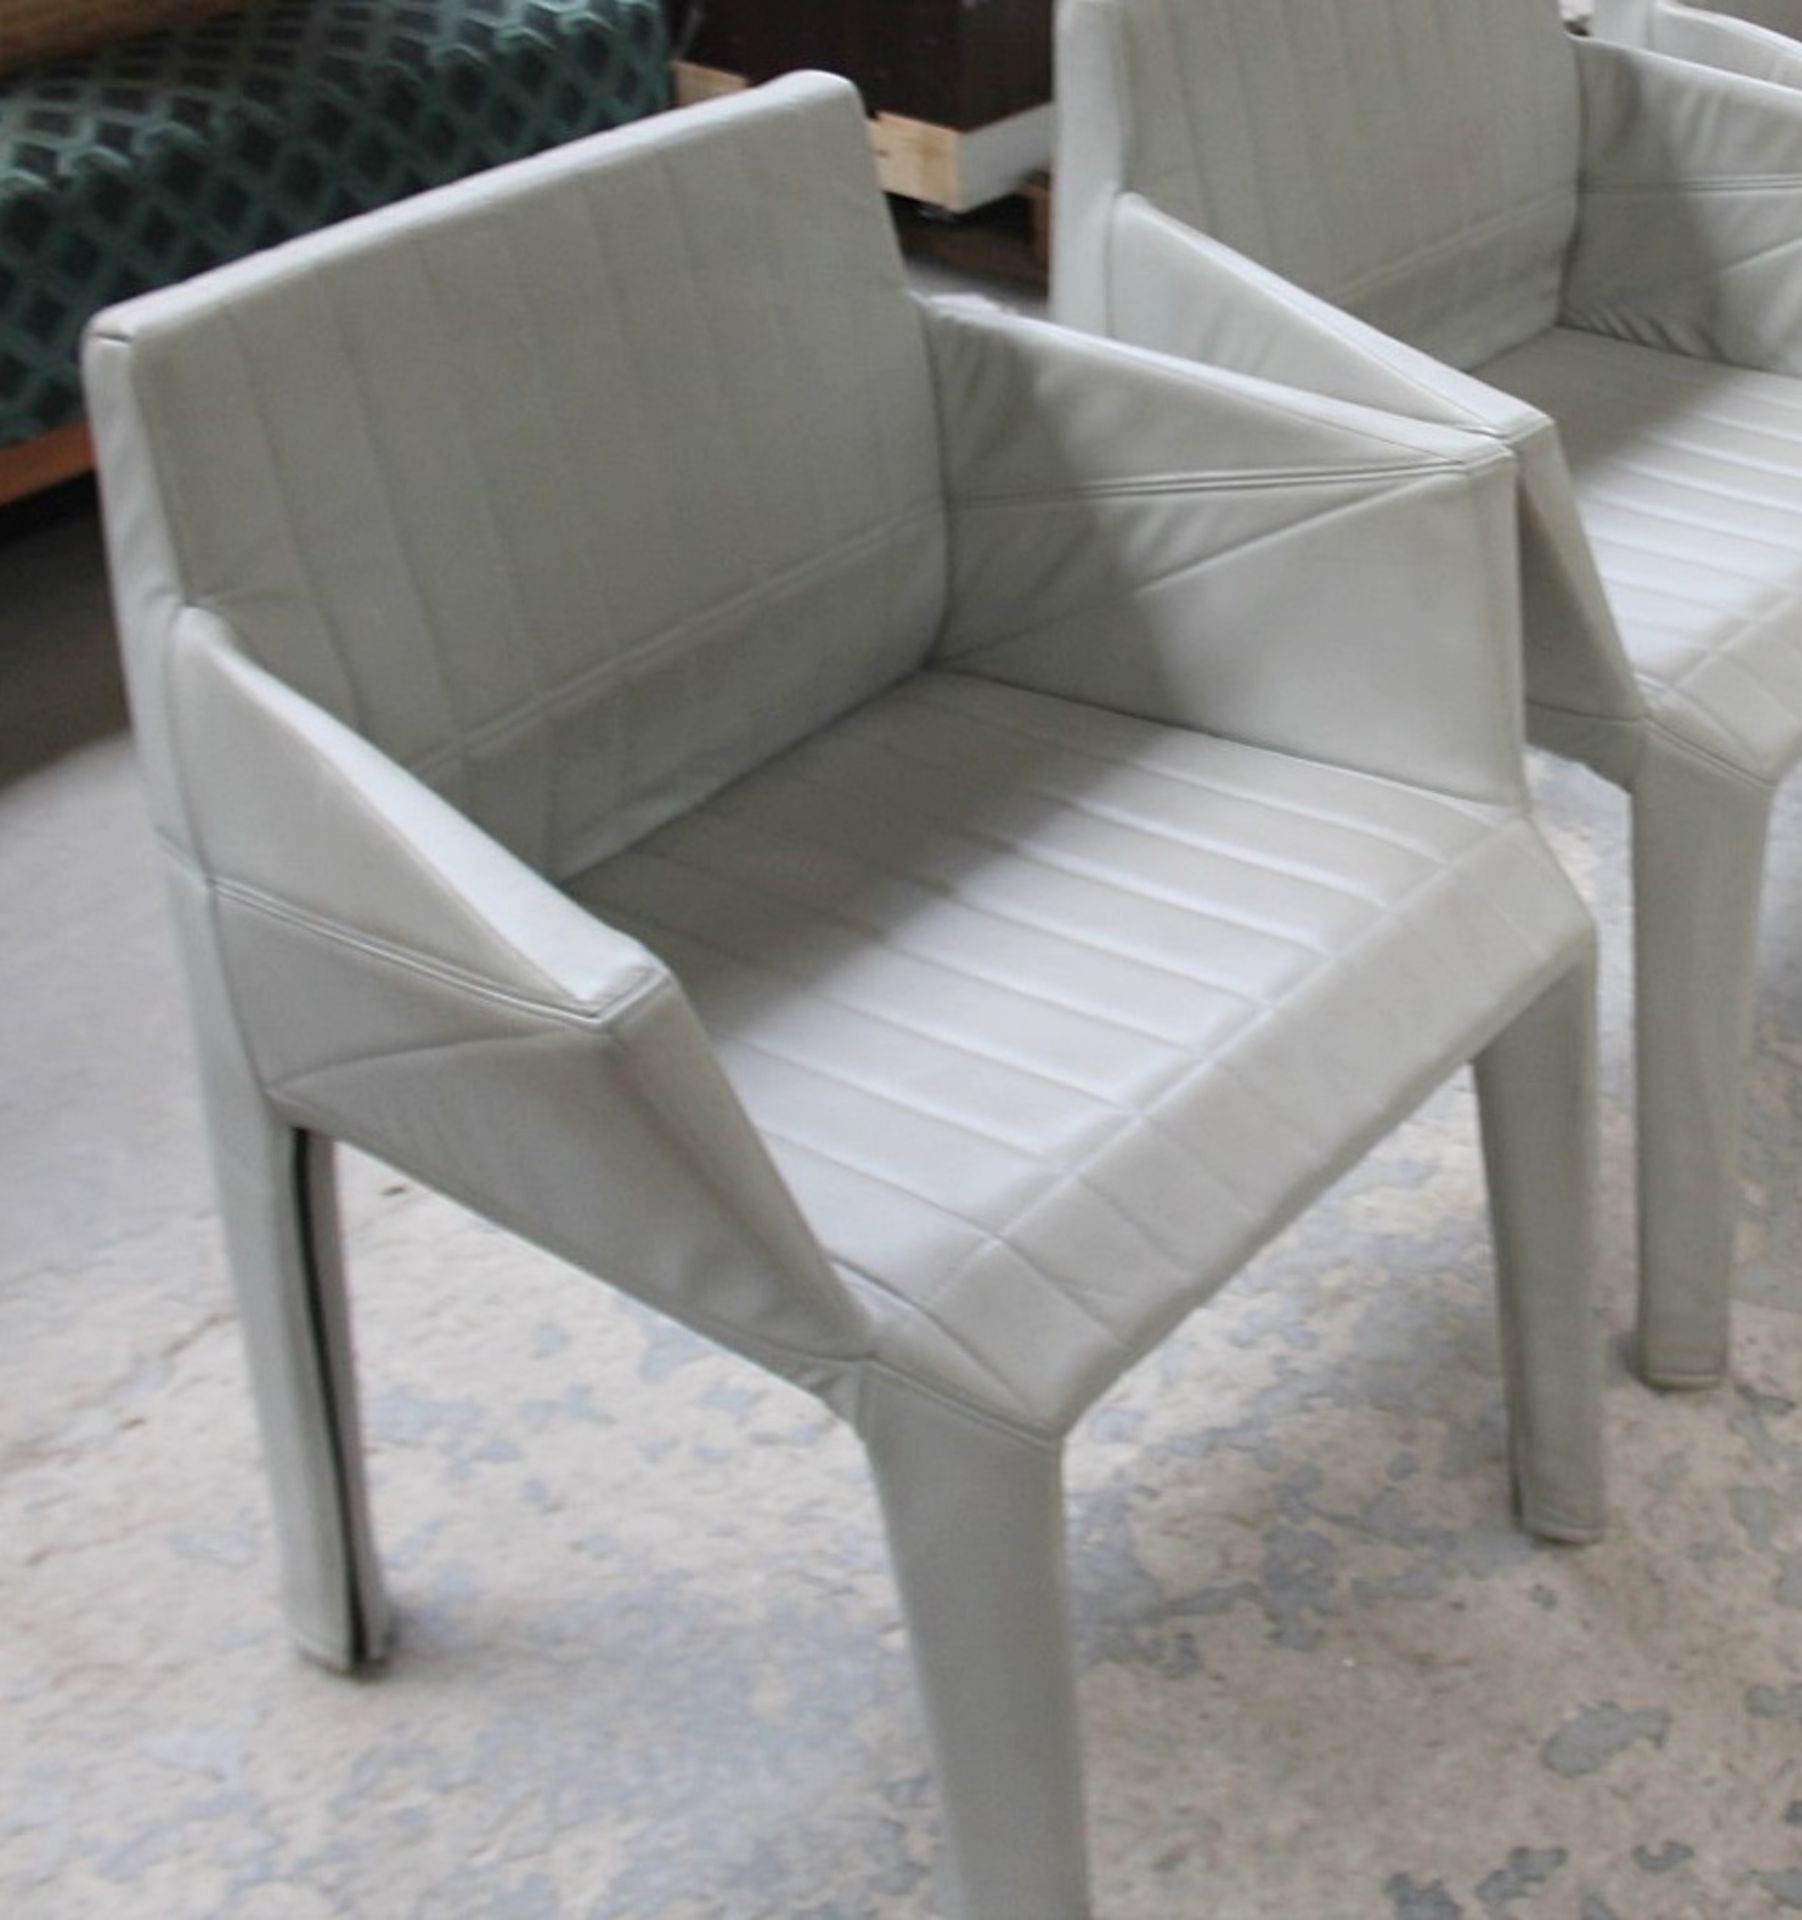 4 x LIGNE ROSET Stylish Leather Chairs - Removed From A World-renowned London Department Store - Image 3 of 11